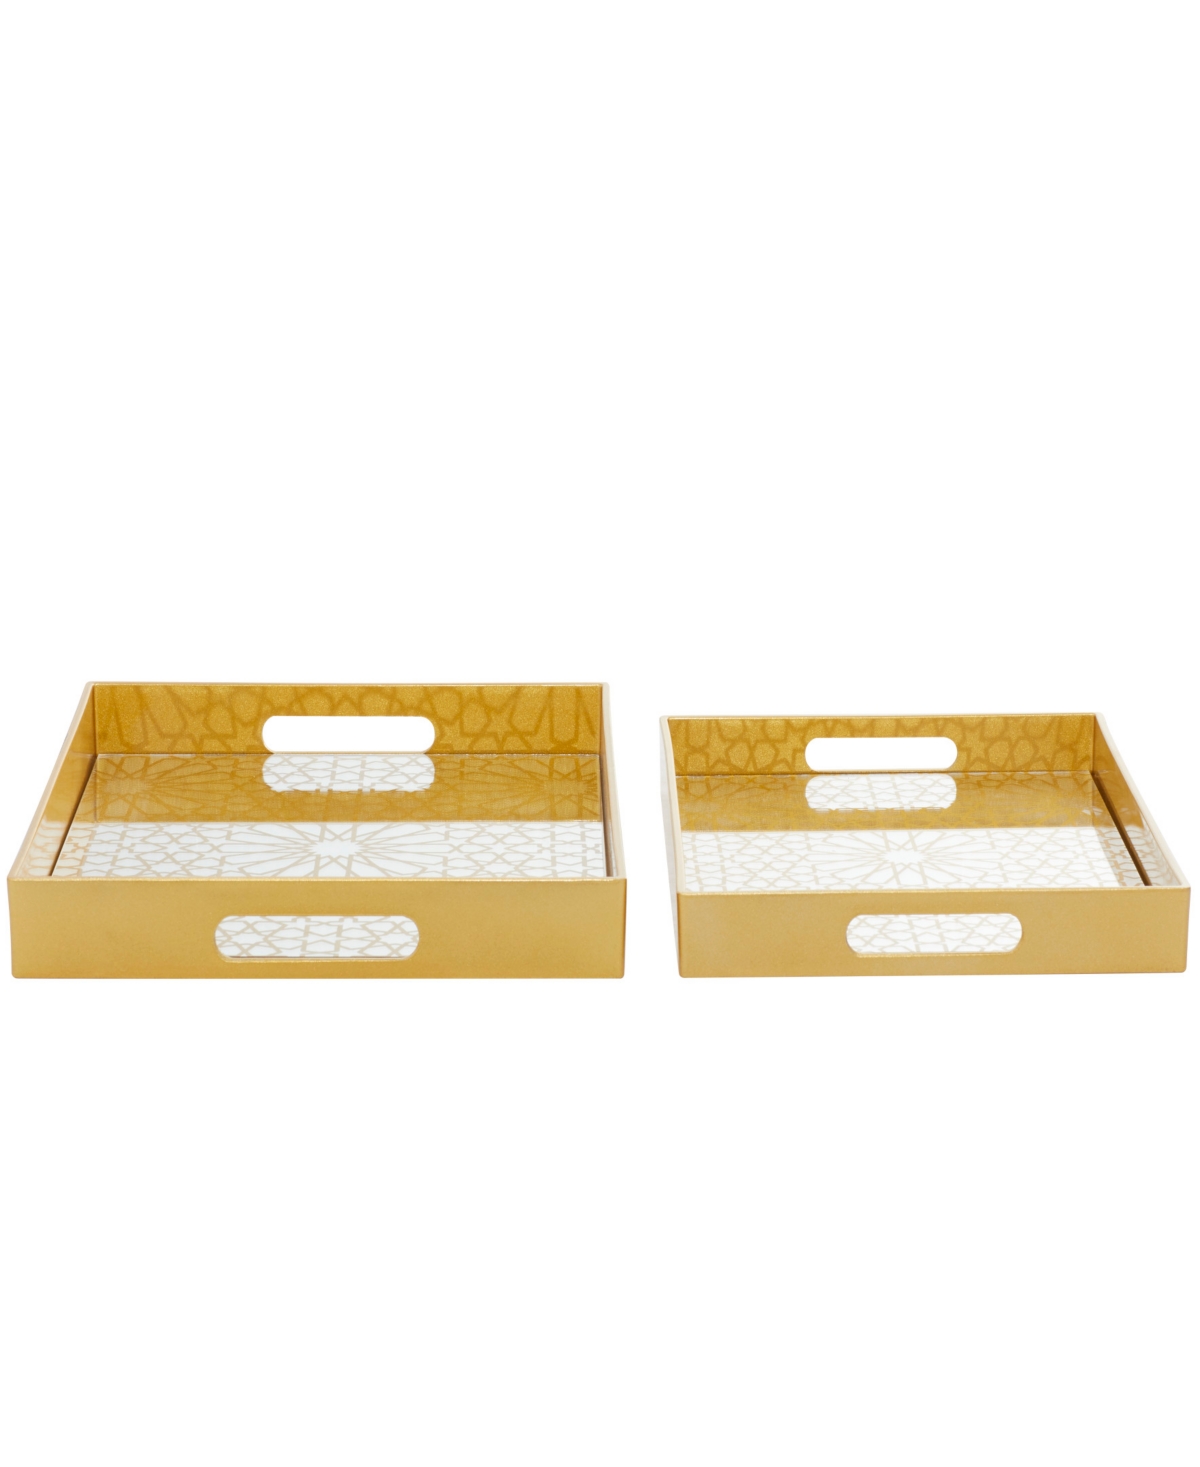 Cosmoliving By Cosmopolitan Plastic Mirrored Geometric Tray, Set Of 2, 14", 16" W In Gold Floral